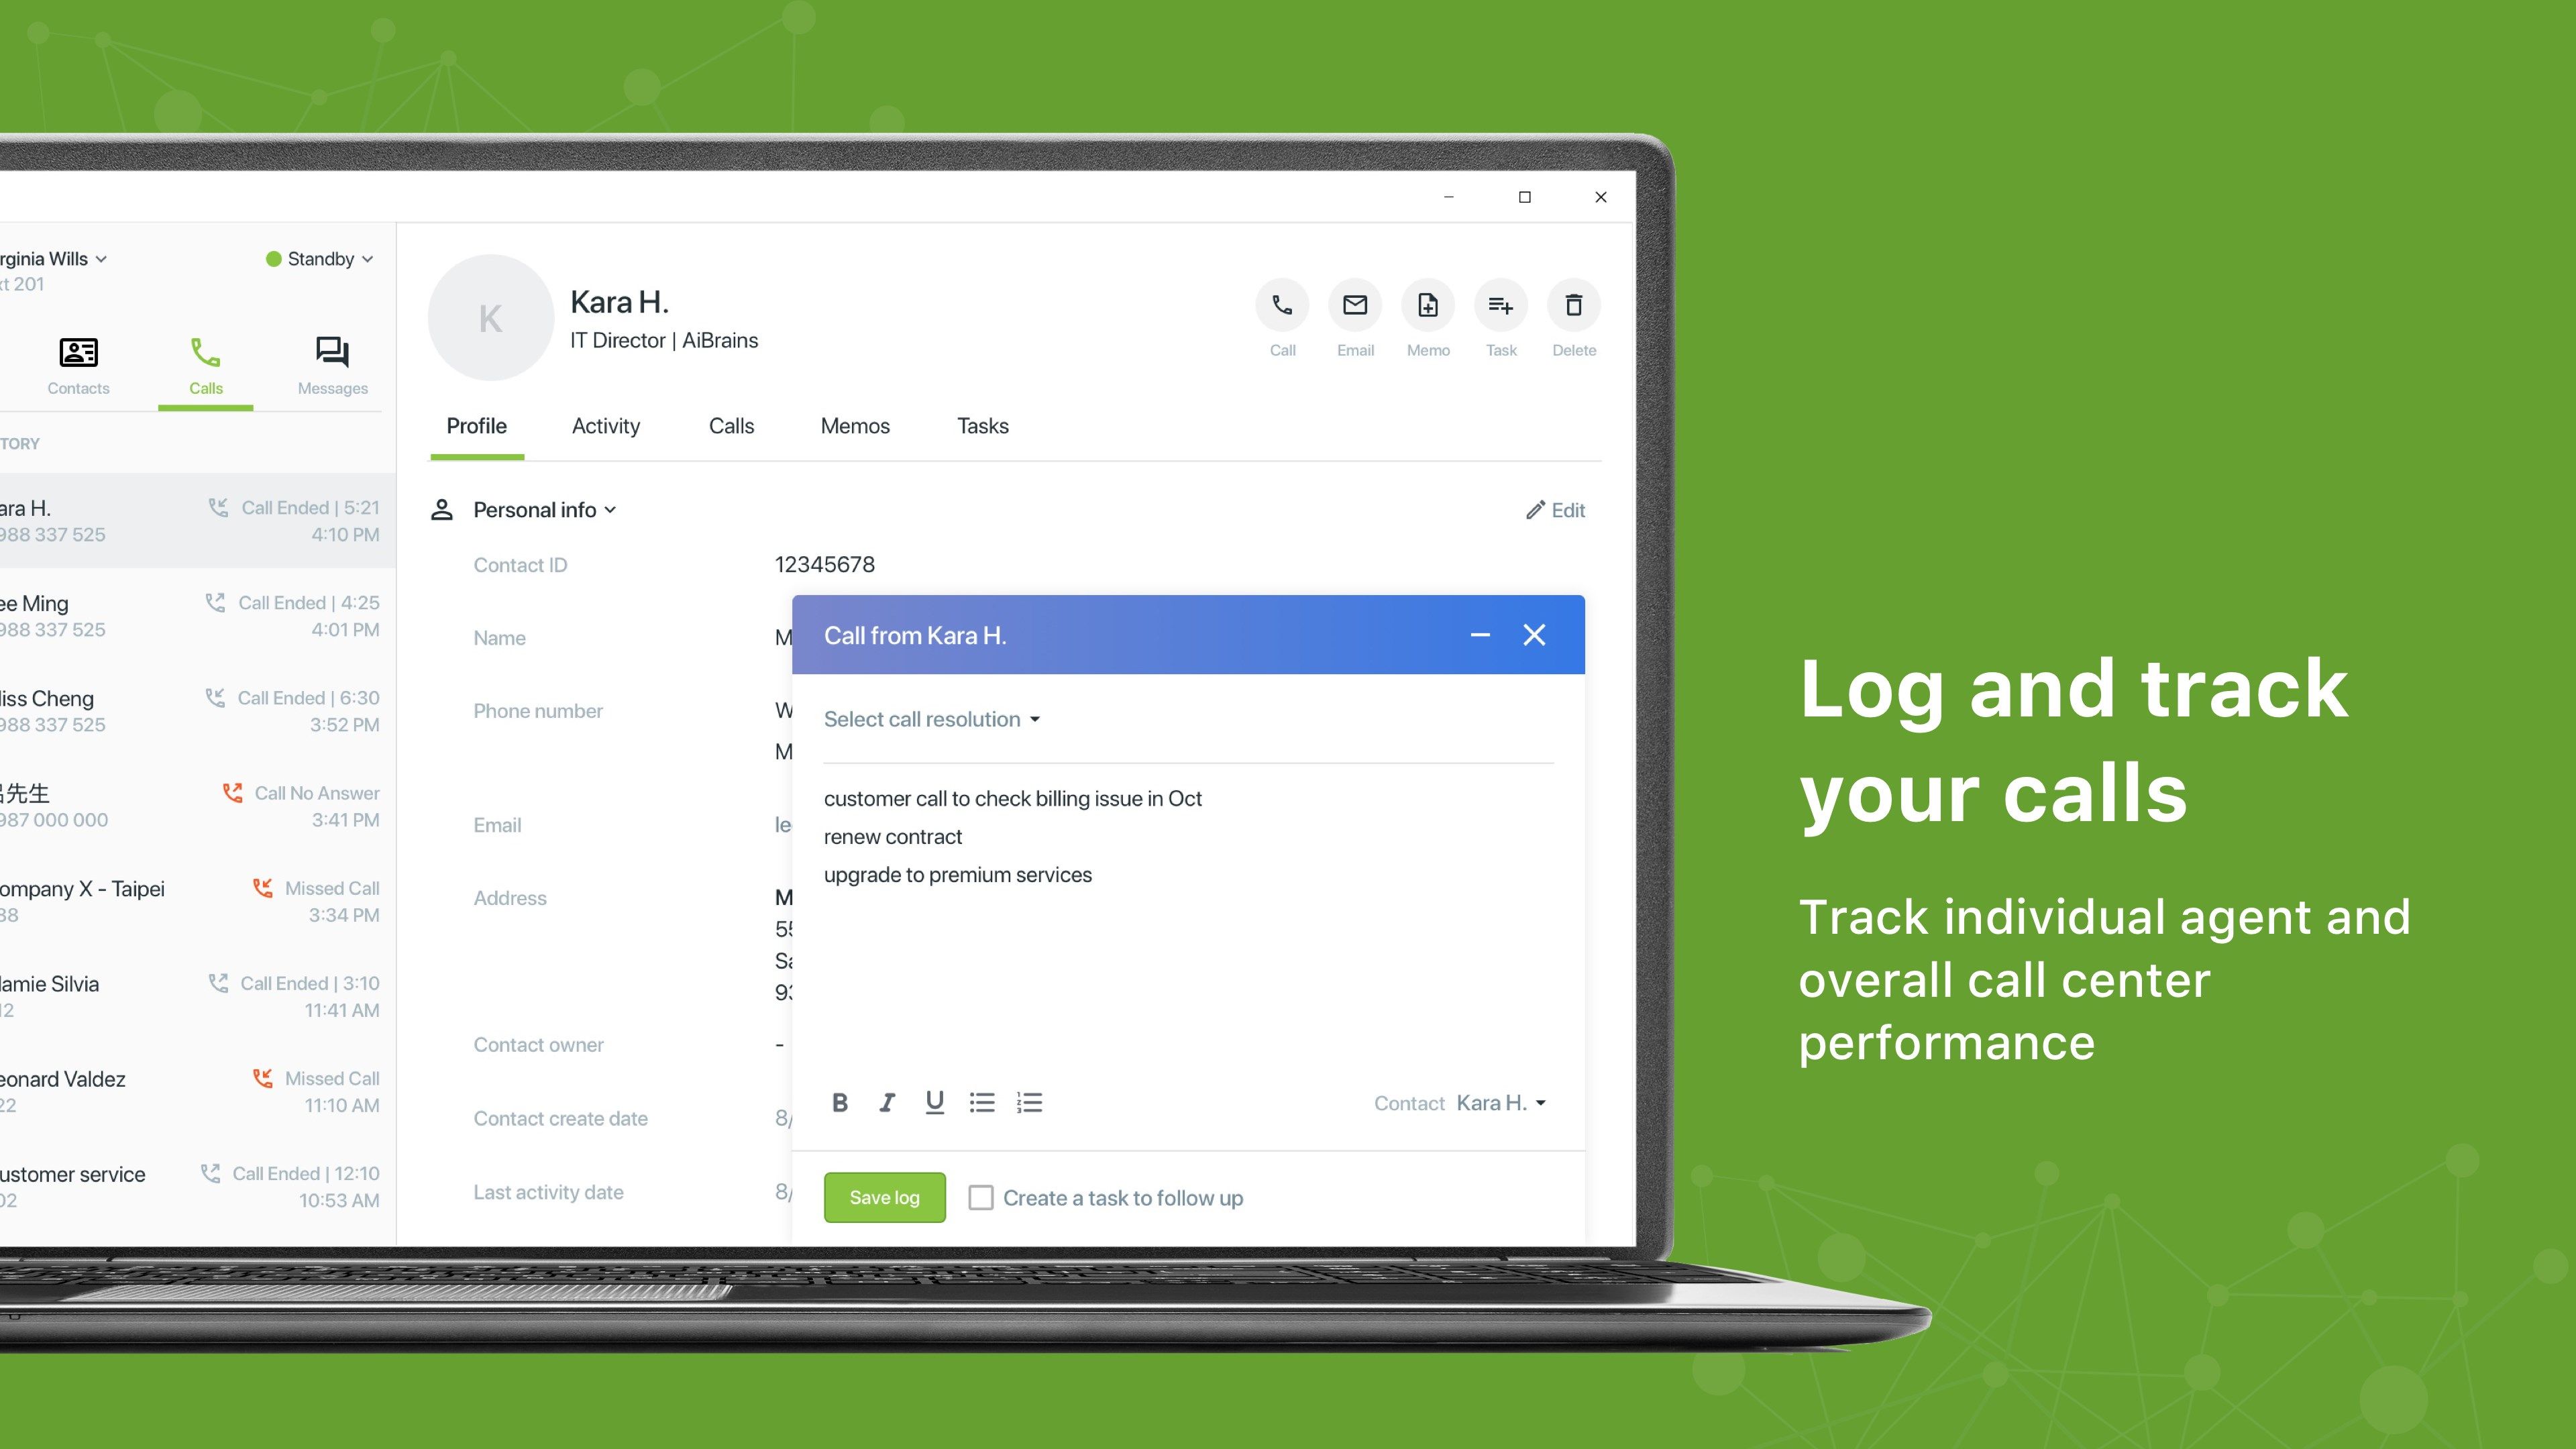 Log and track your calls